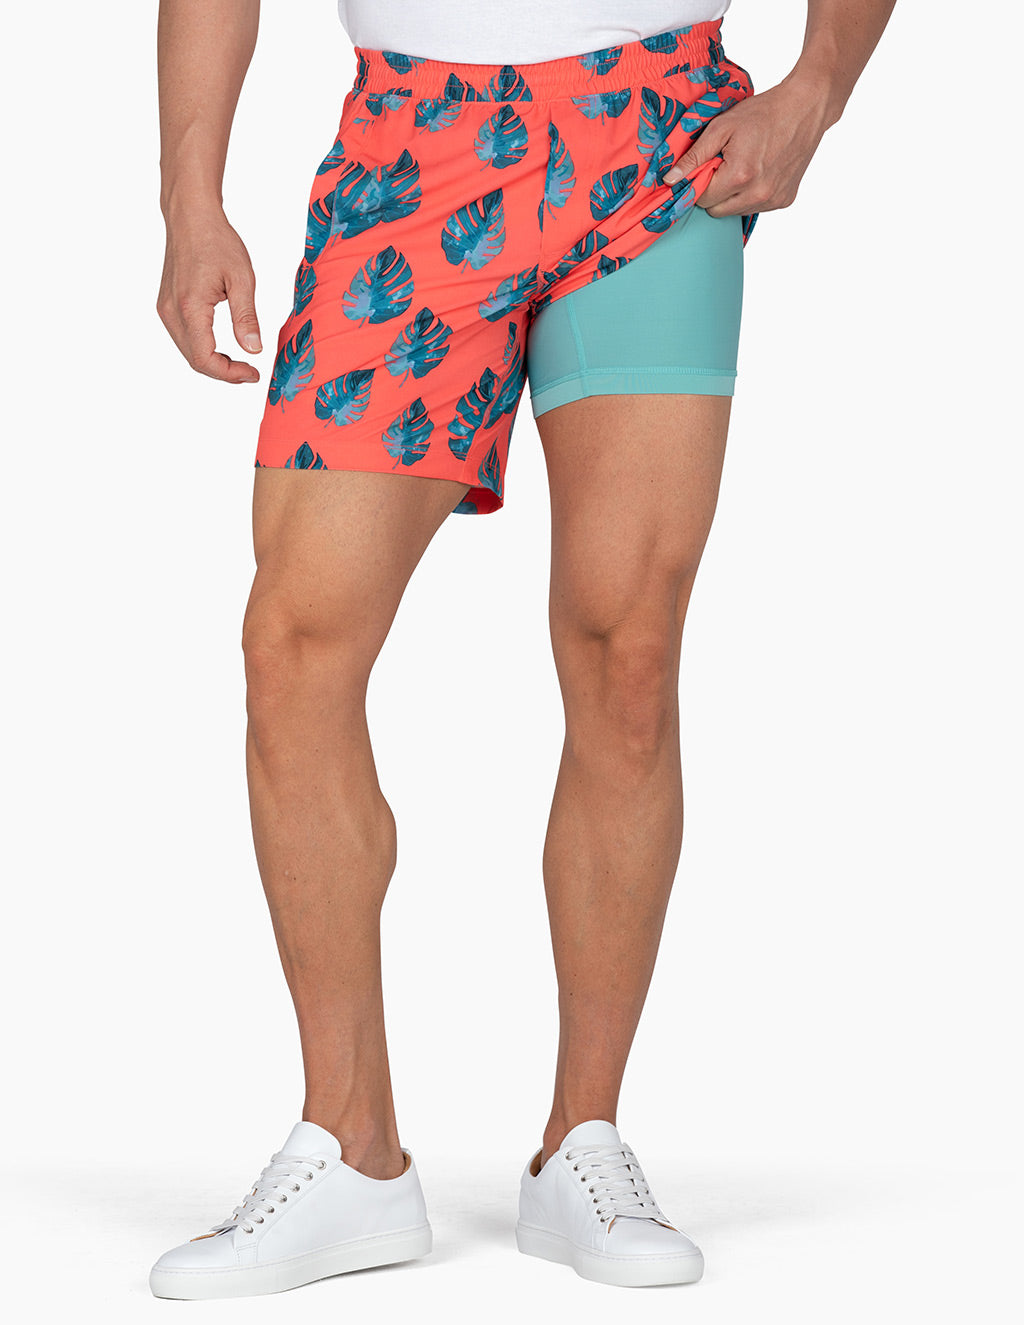 birddogs Red shorts with blue leaves on model showing built-in liner